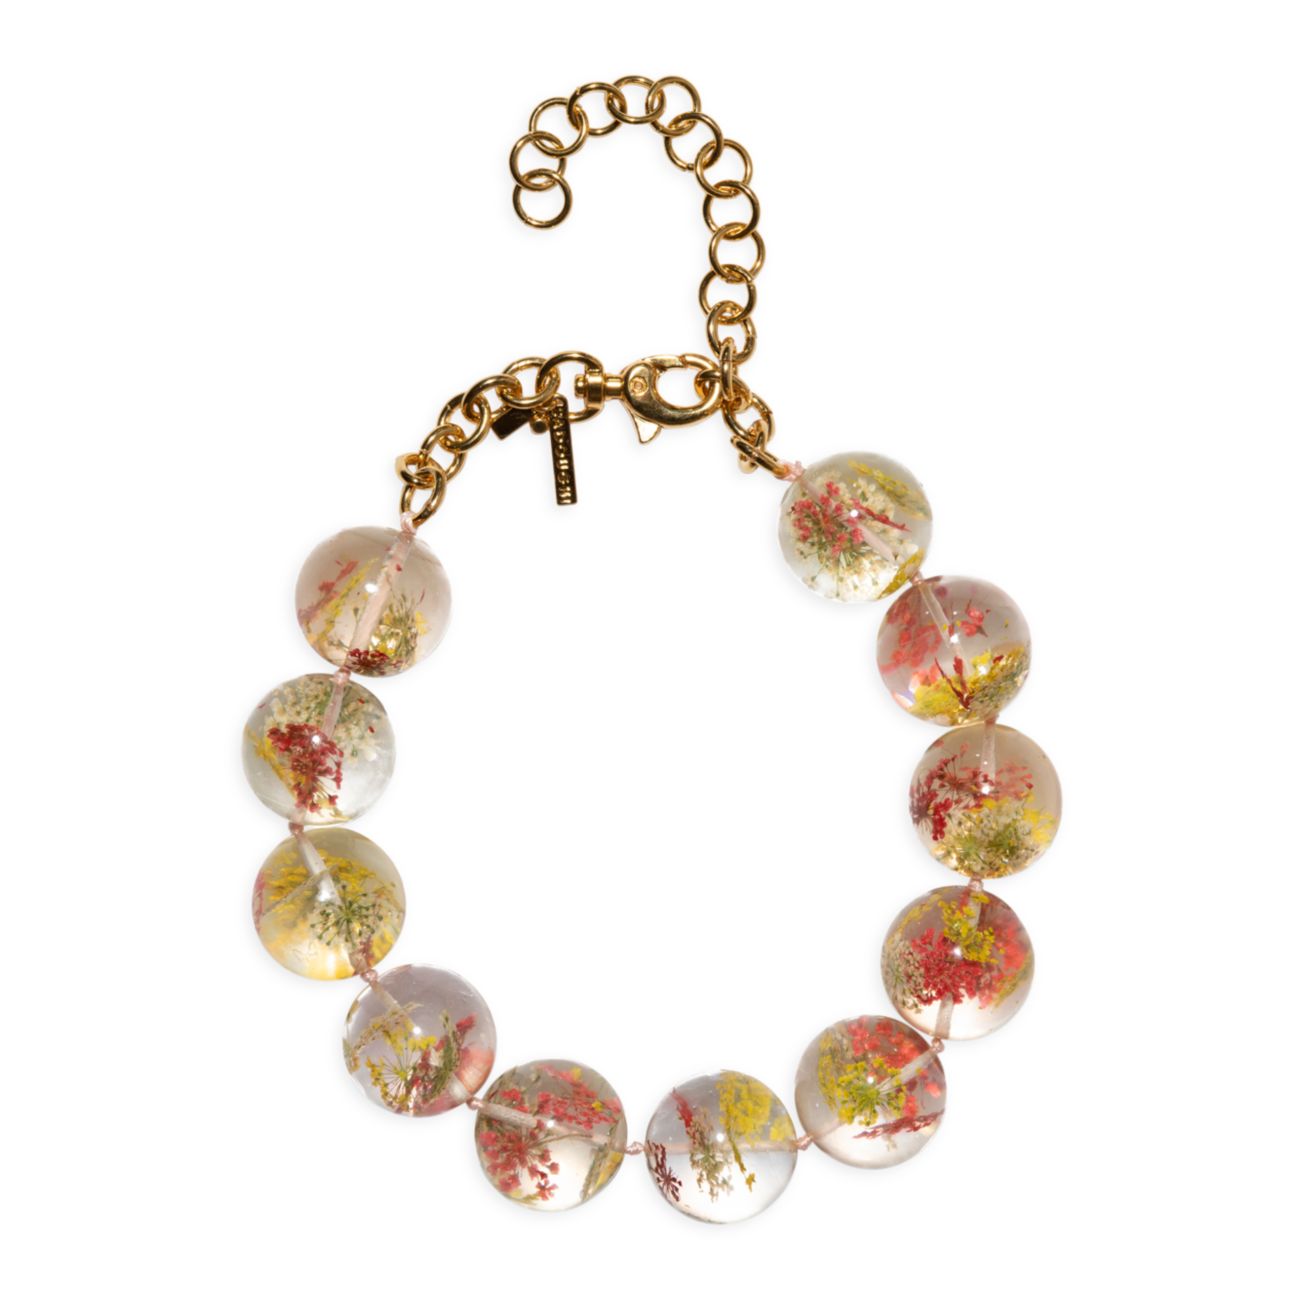 Dried Floral Beaded Necklace Lele Sadoughi